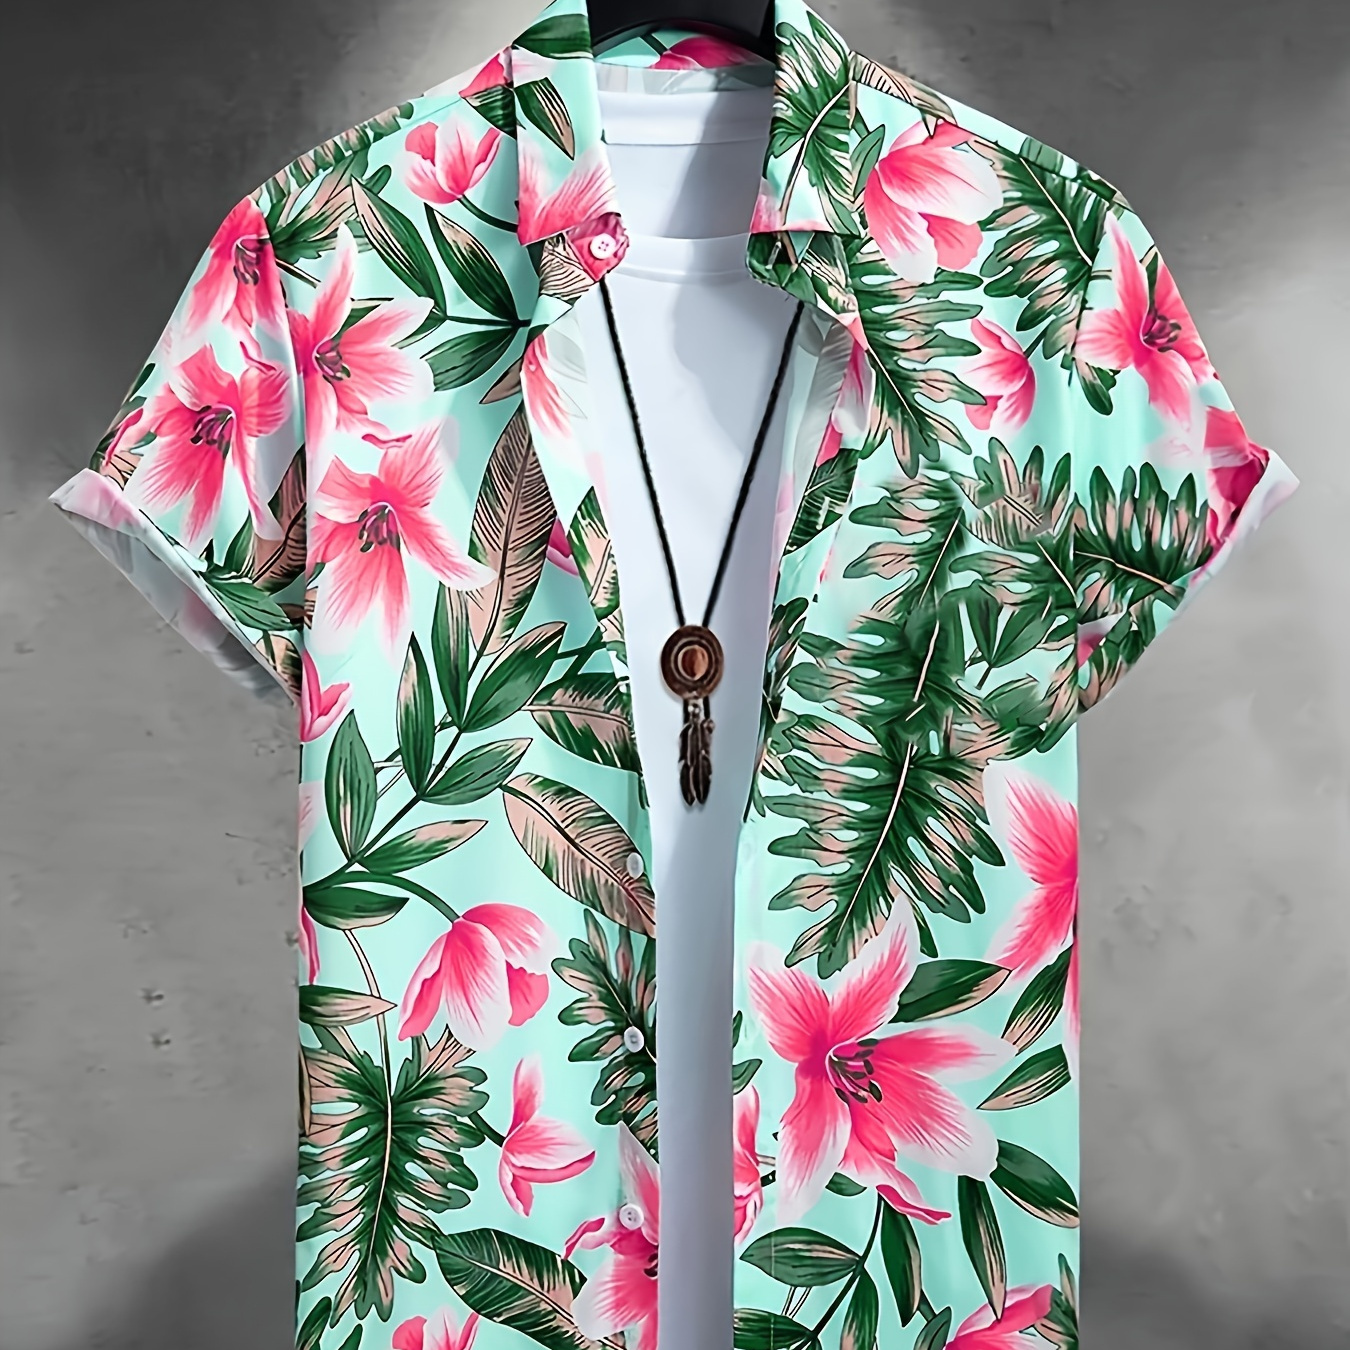 

Men's Tropical Floral Pattern Print Lapel Shirt With Short Sleeve And Button Down Placket, Chill And Trendy Tops For Summer Leisurewear And Beach Vacation